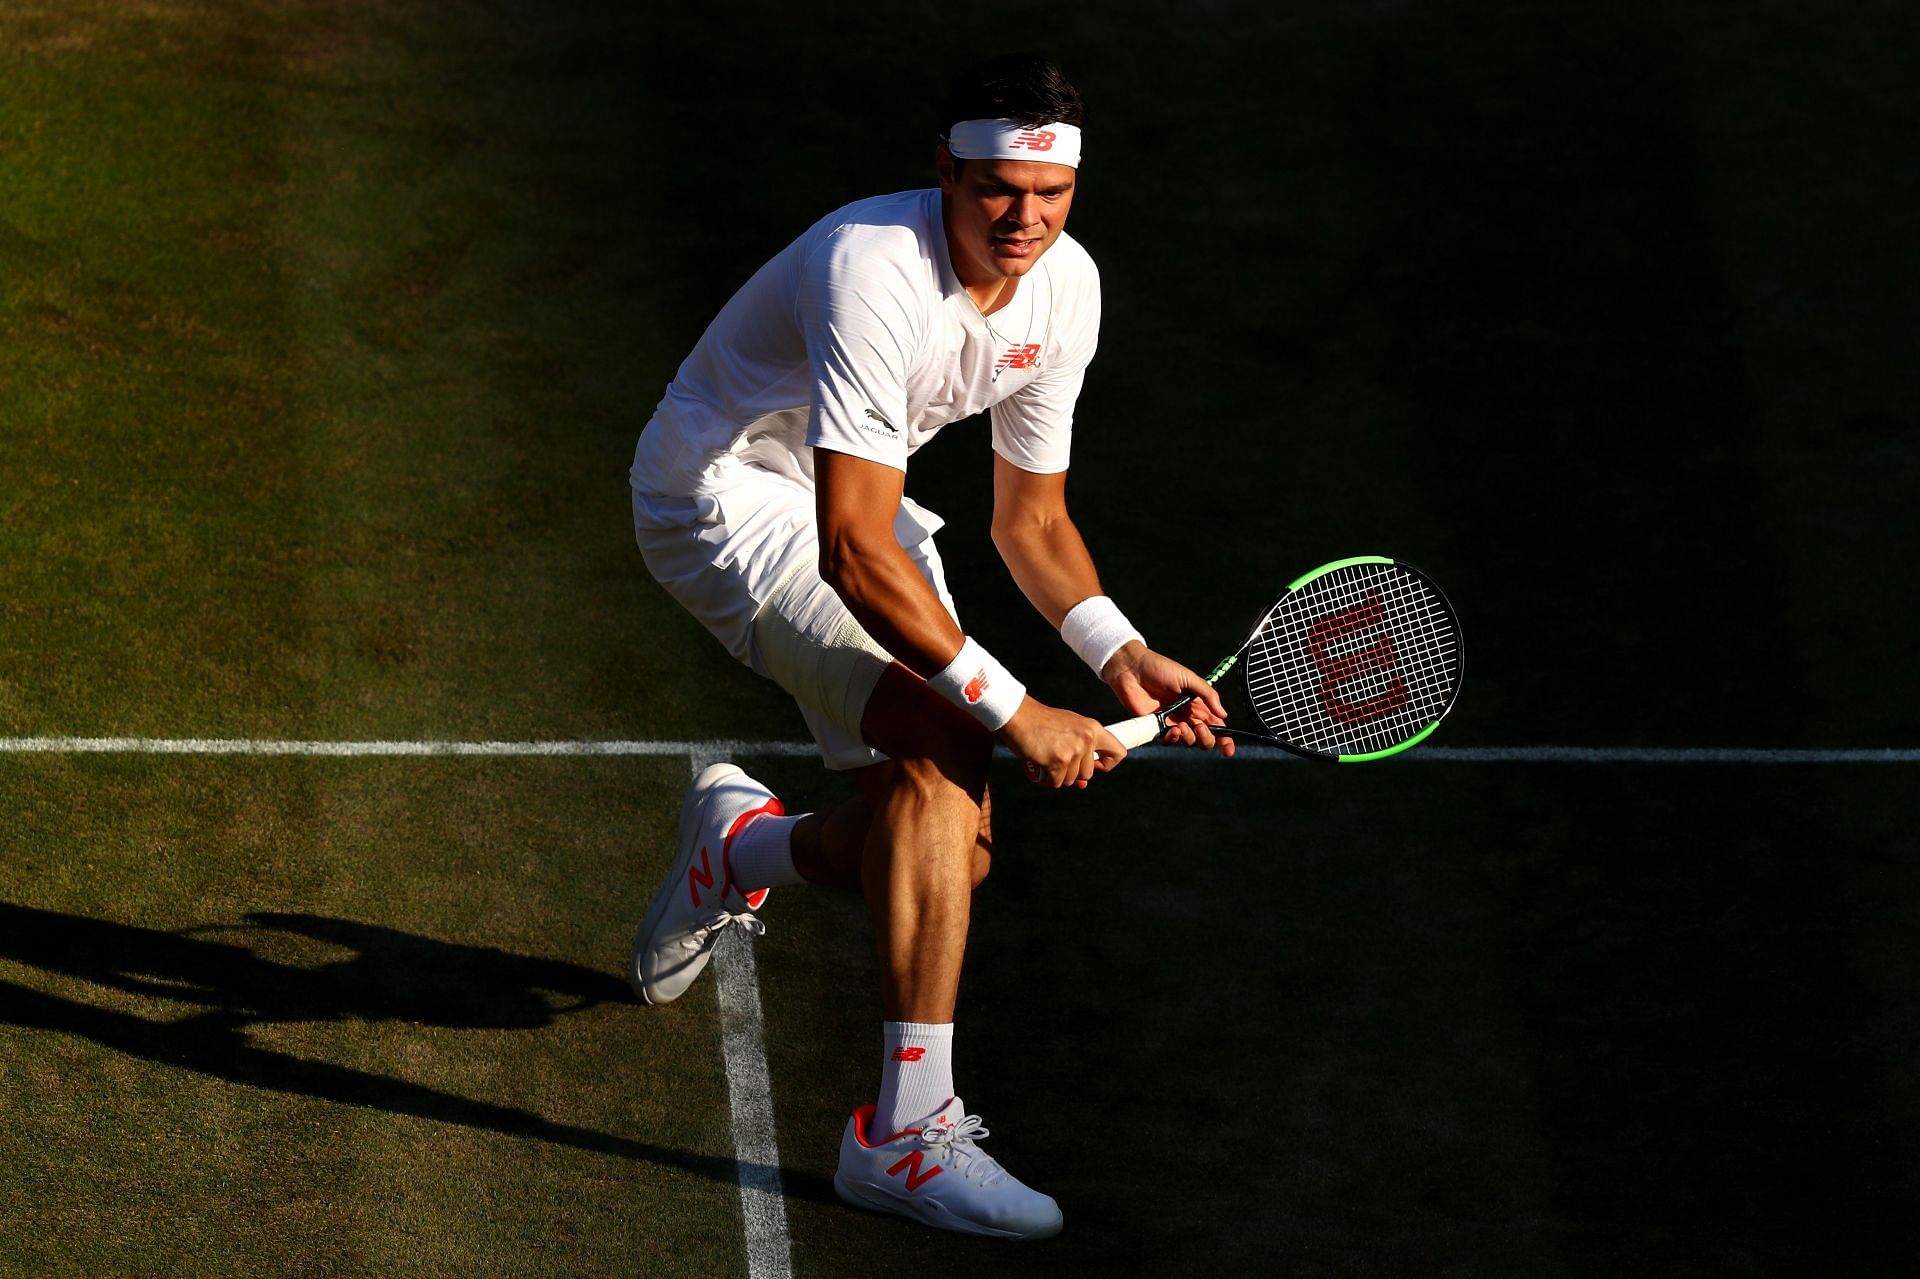 Milos Raonic in action at the 2018 Wimbledon Championships